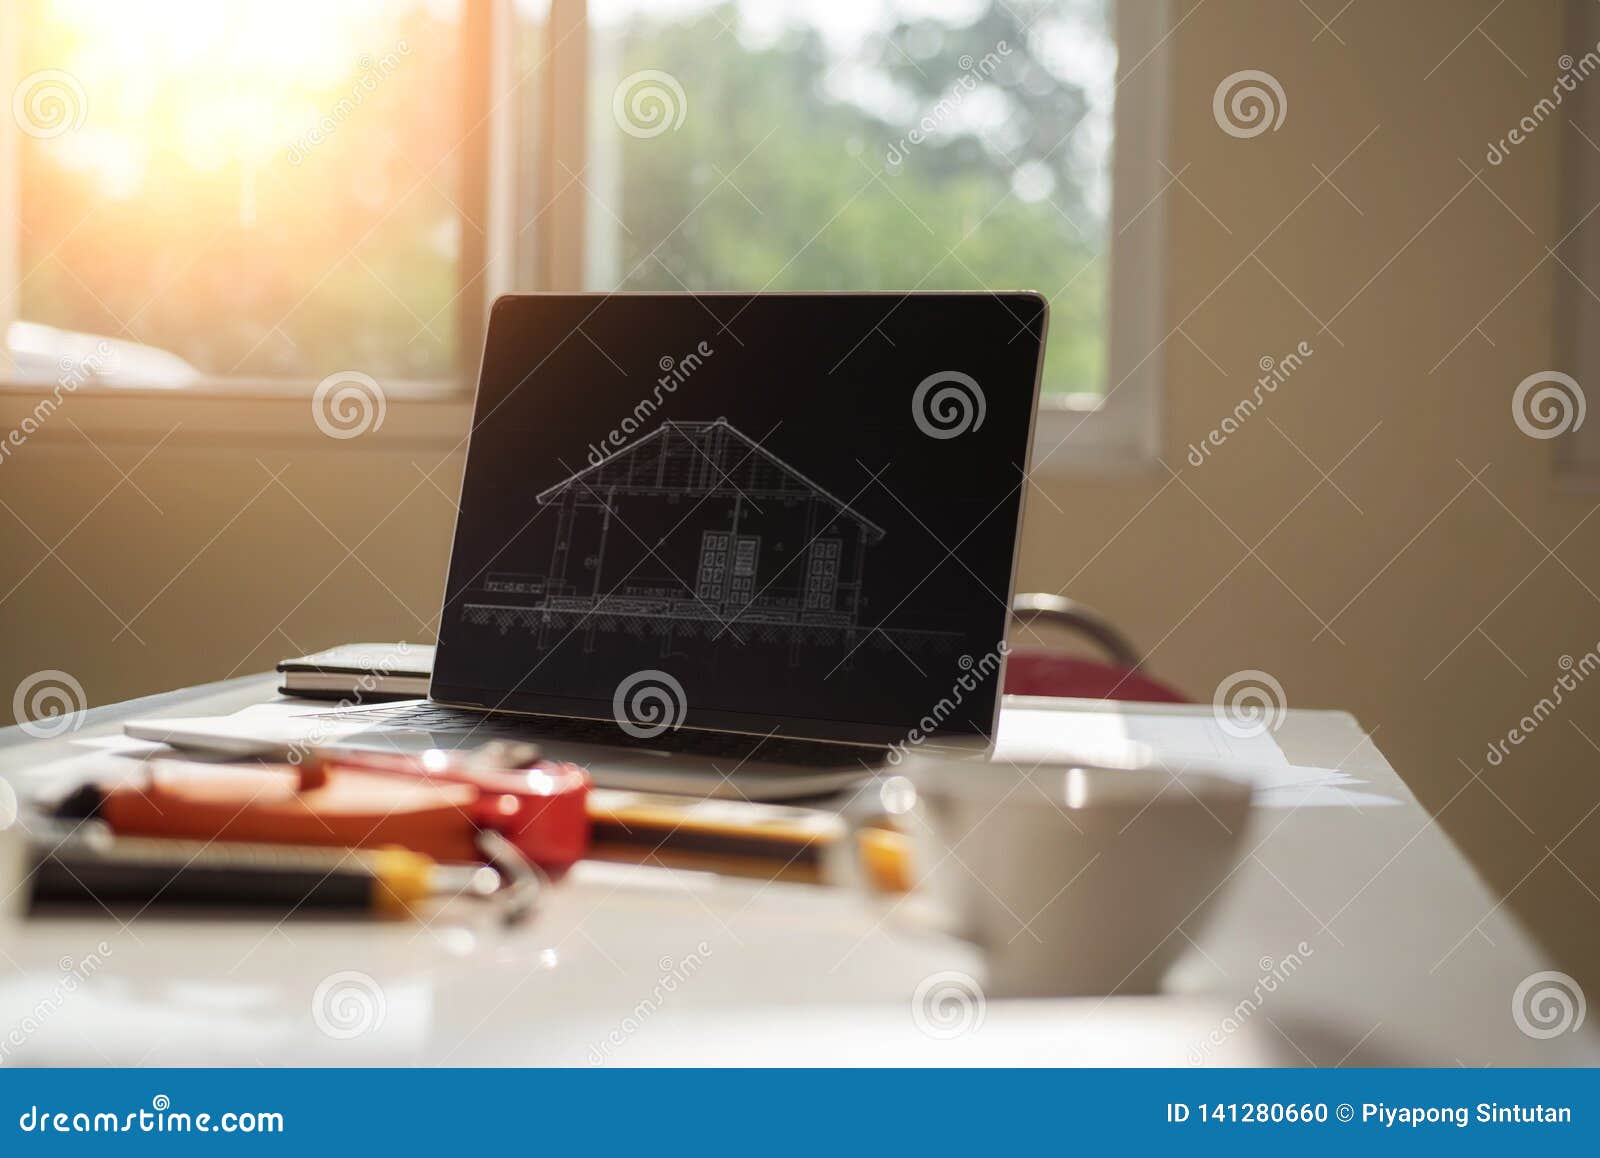 Desk Of Architects Engineer With A Blueprint On Table In The